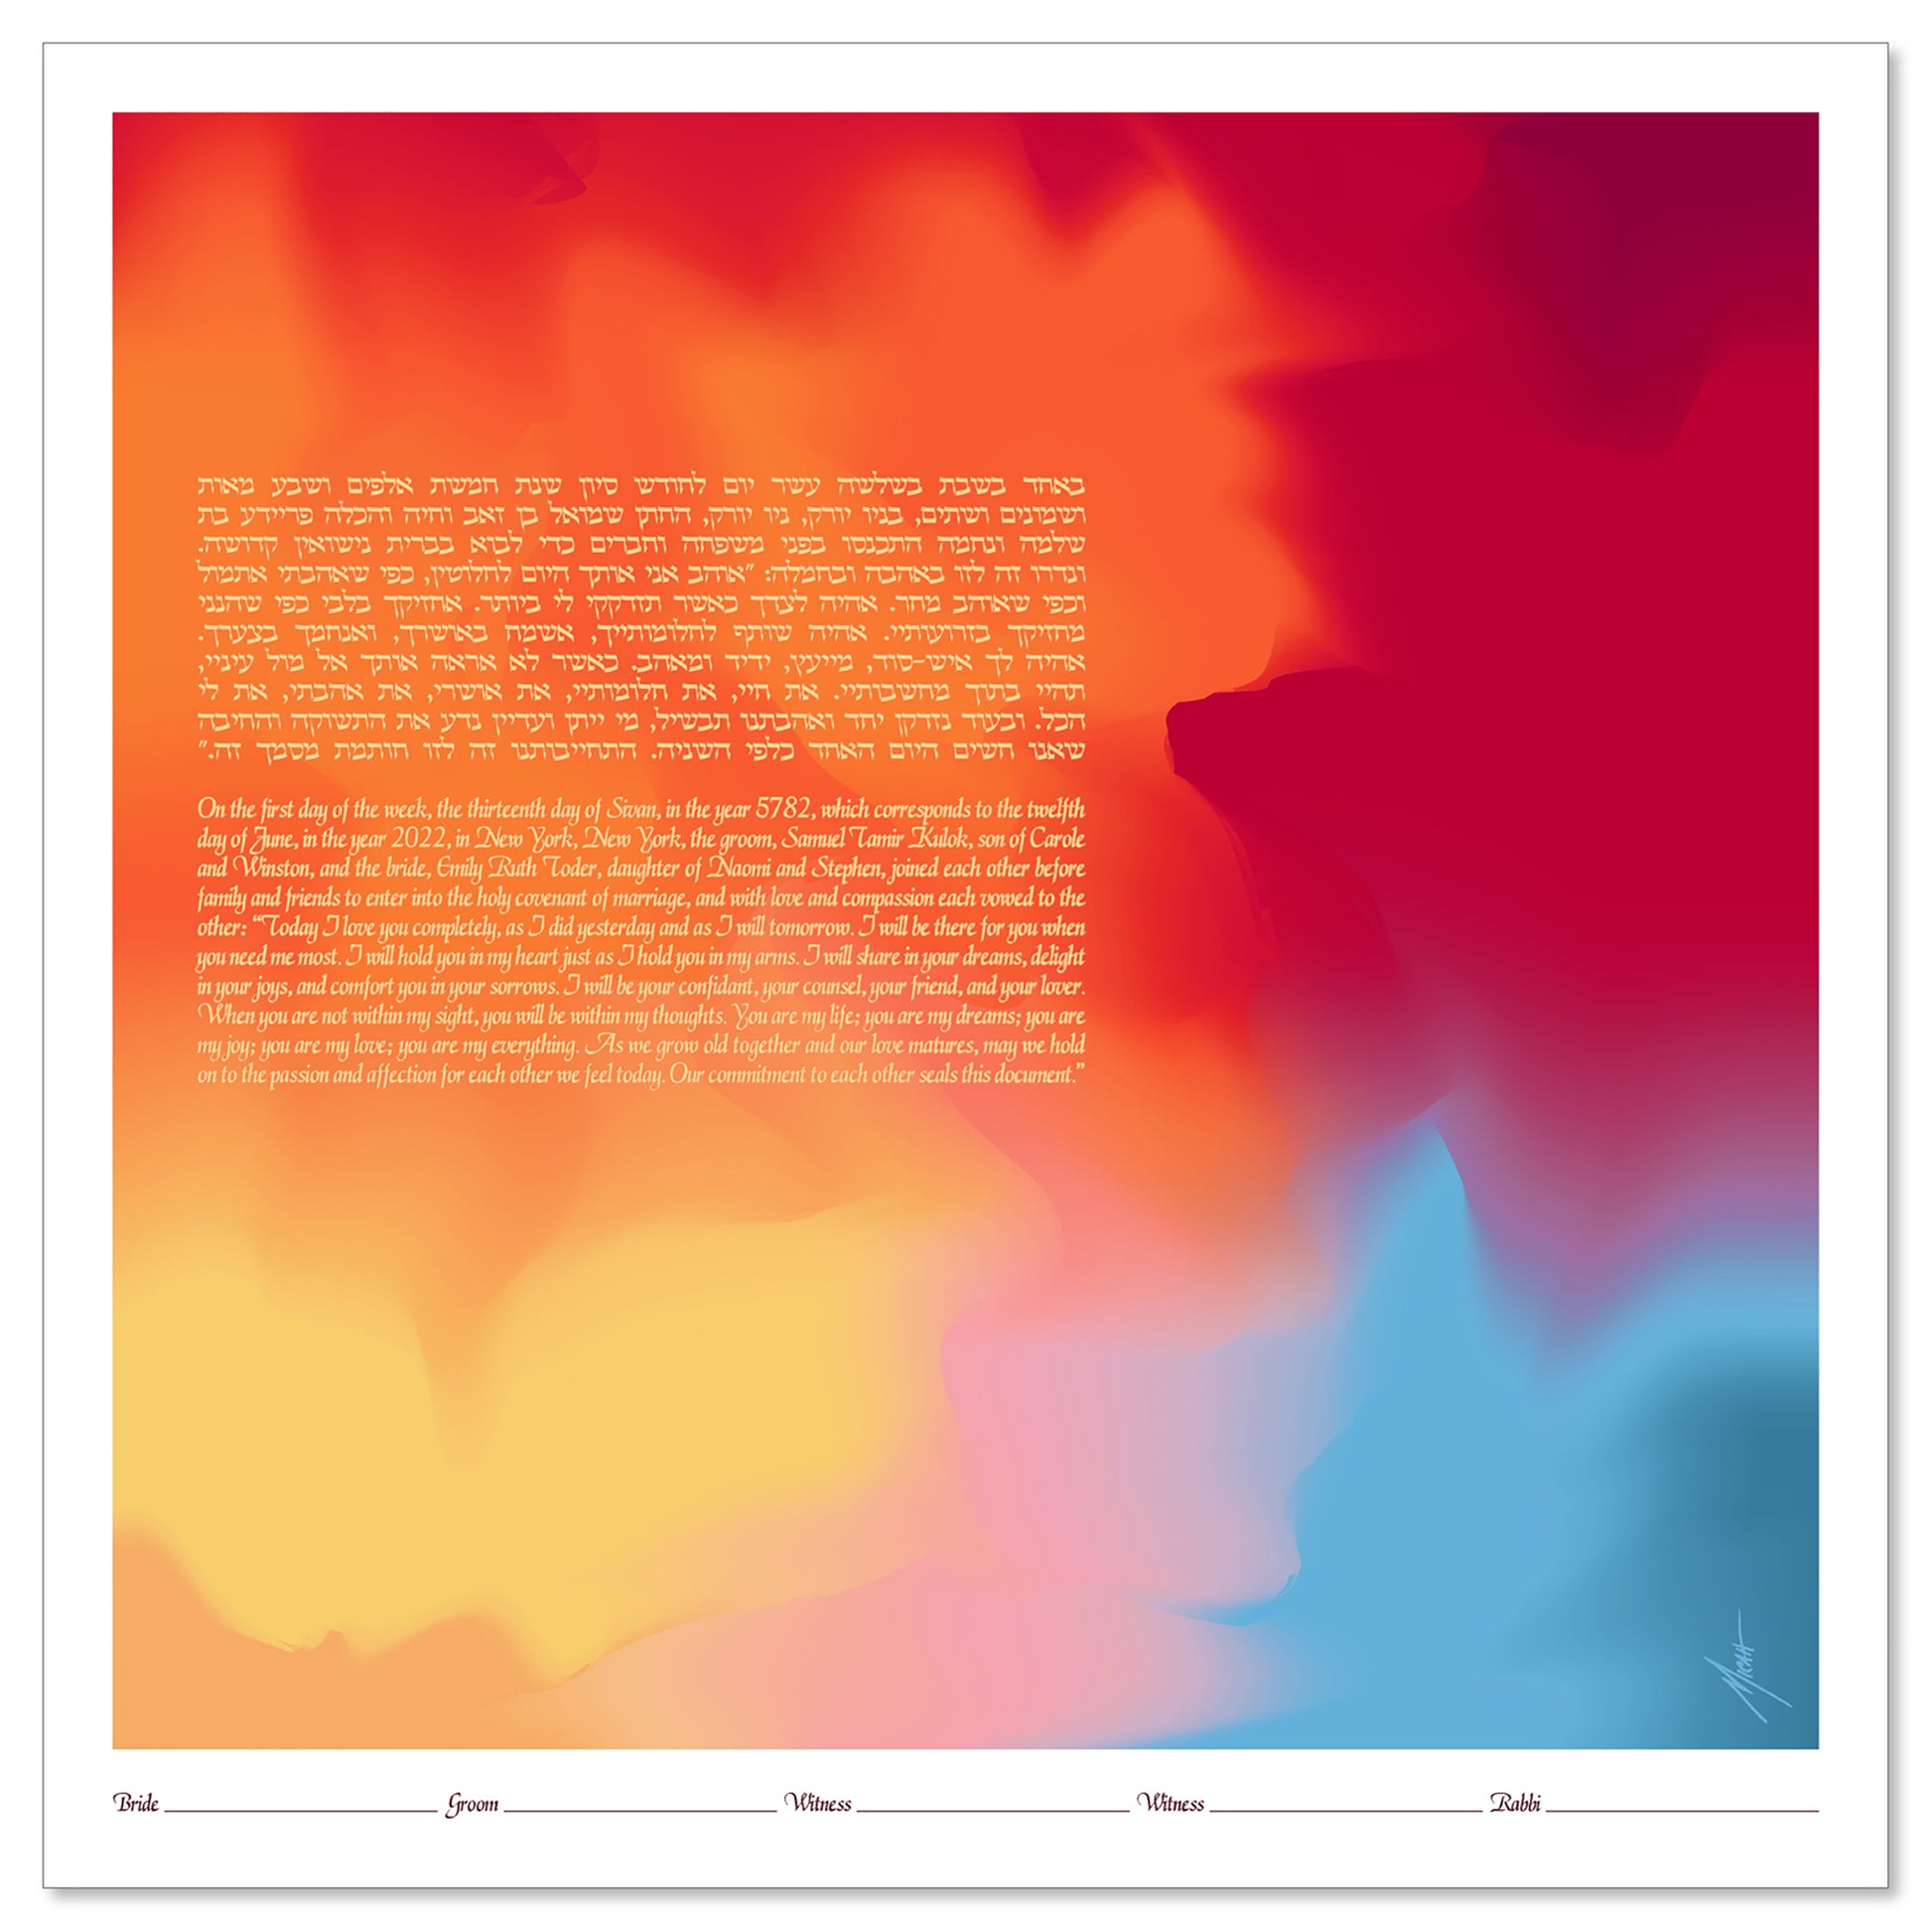 Autumn by the Lake ketubah by Micah Parker with abstract swaths of red, orange, yellow, pink, and blue moving across the design.